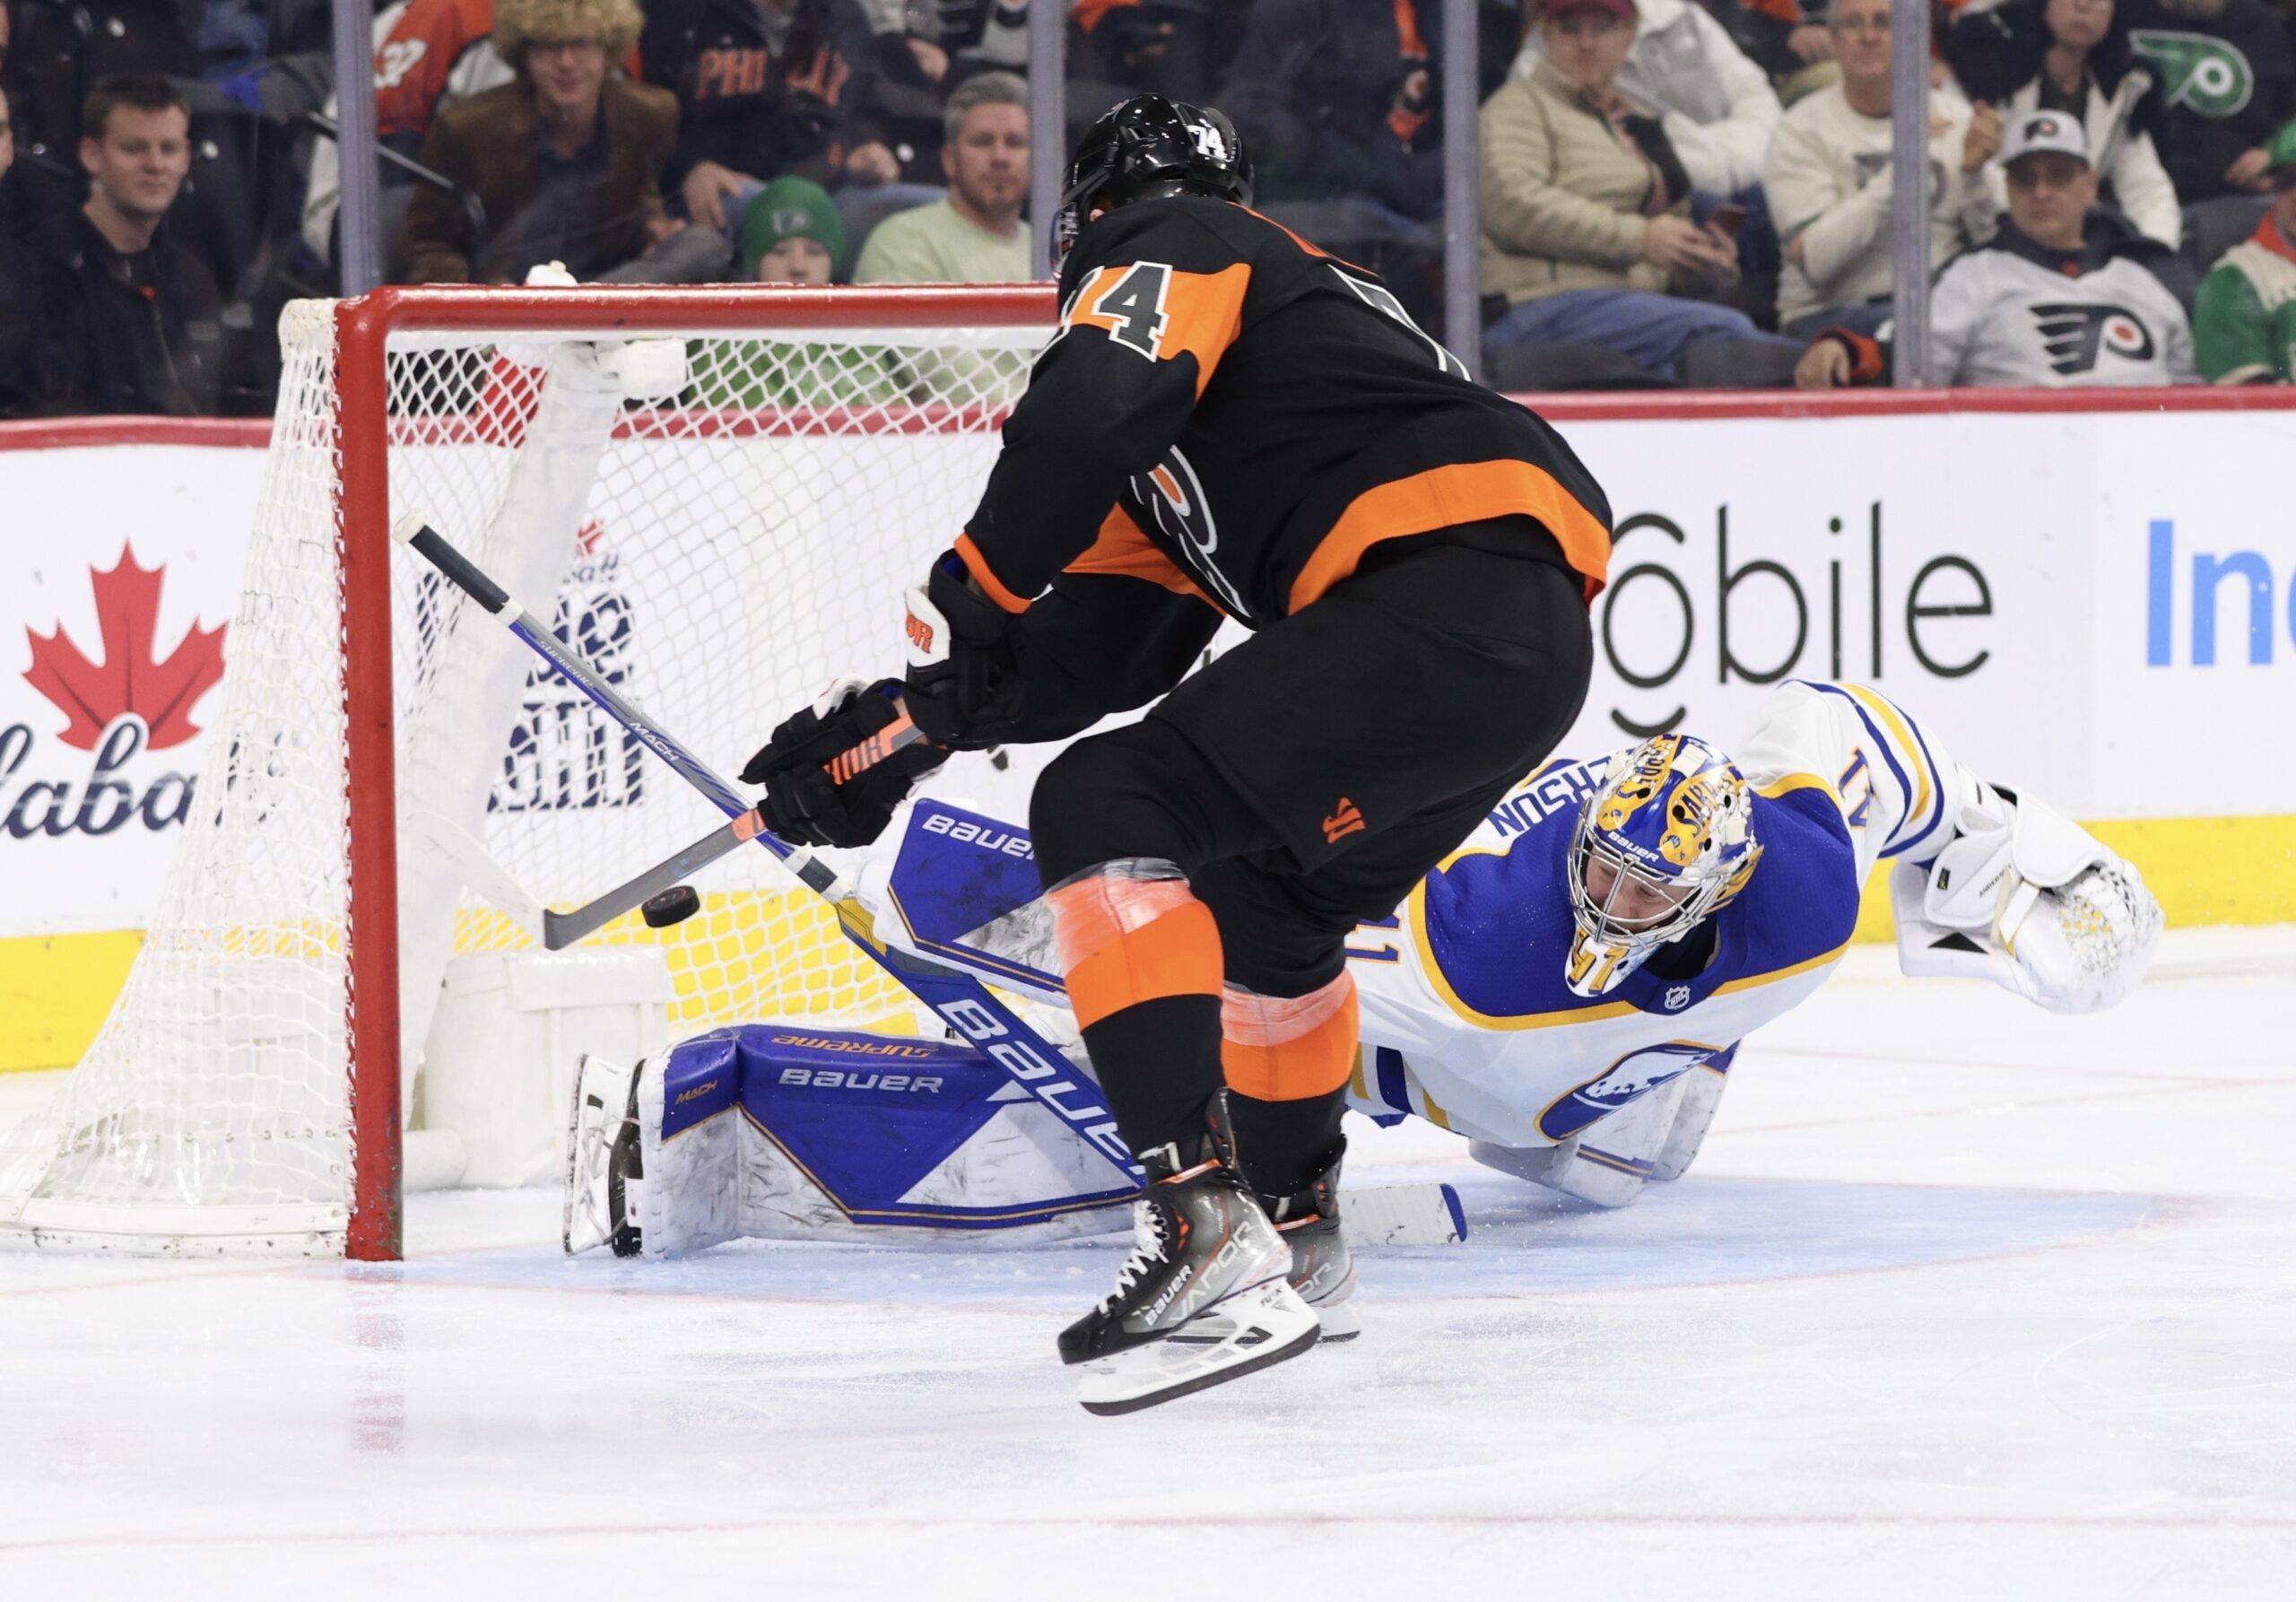 Sabres fall flat against the Flyers, 4-0